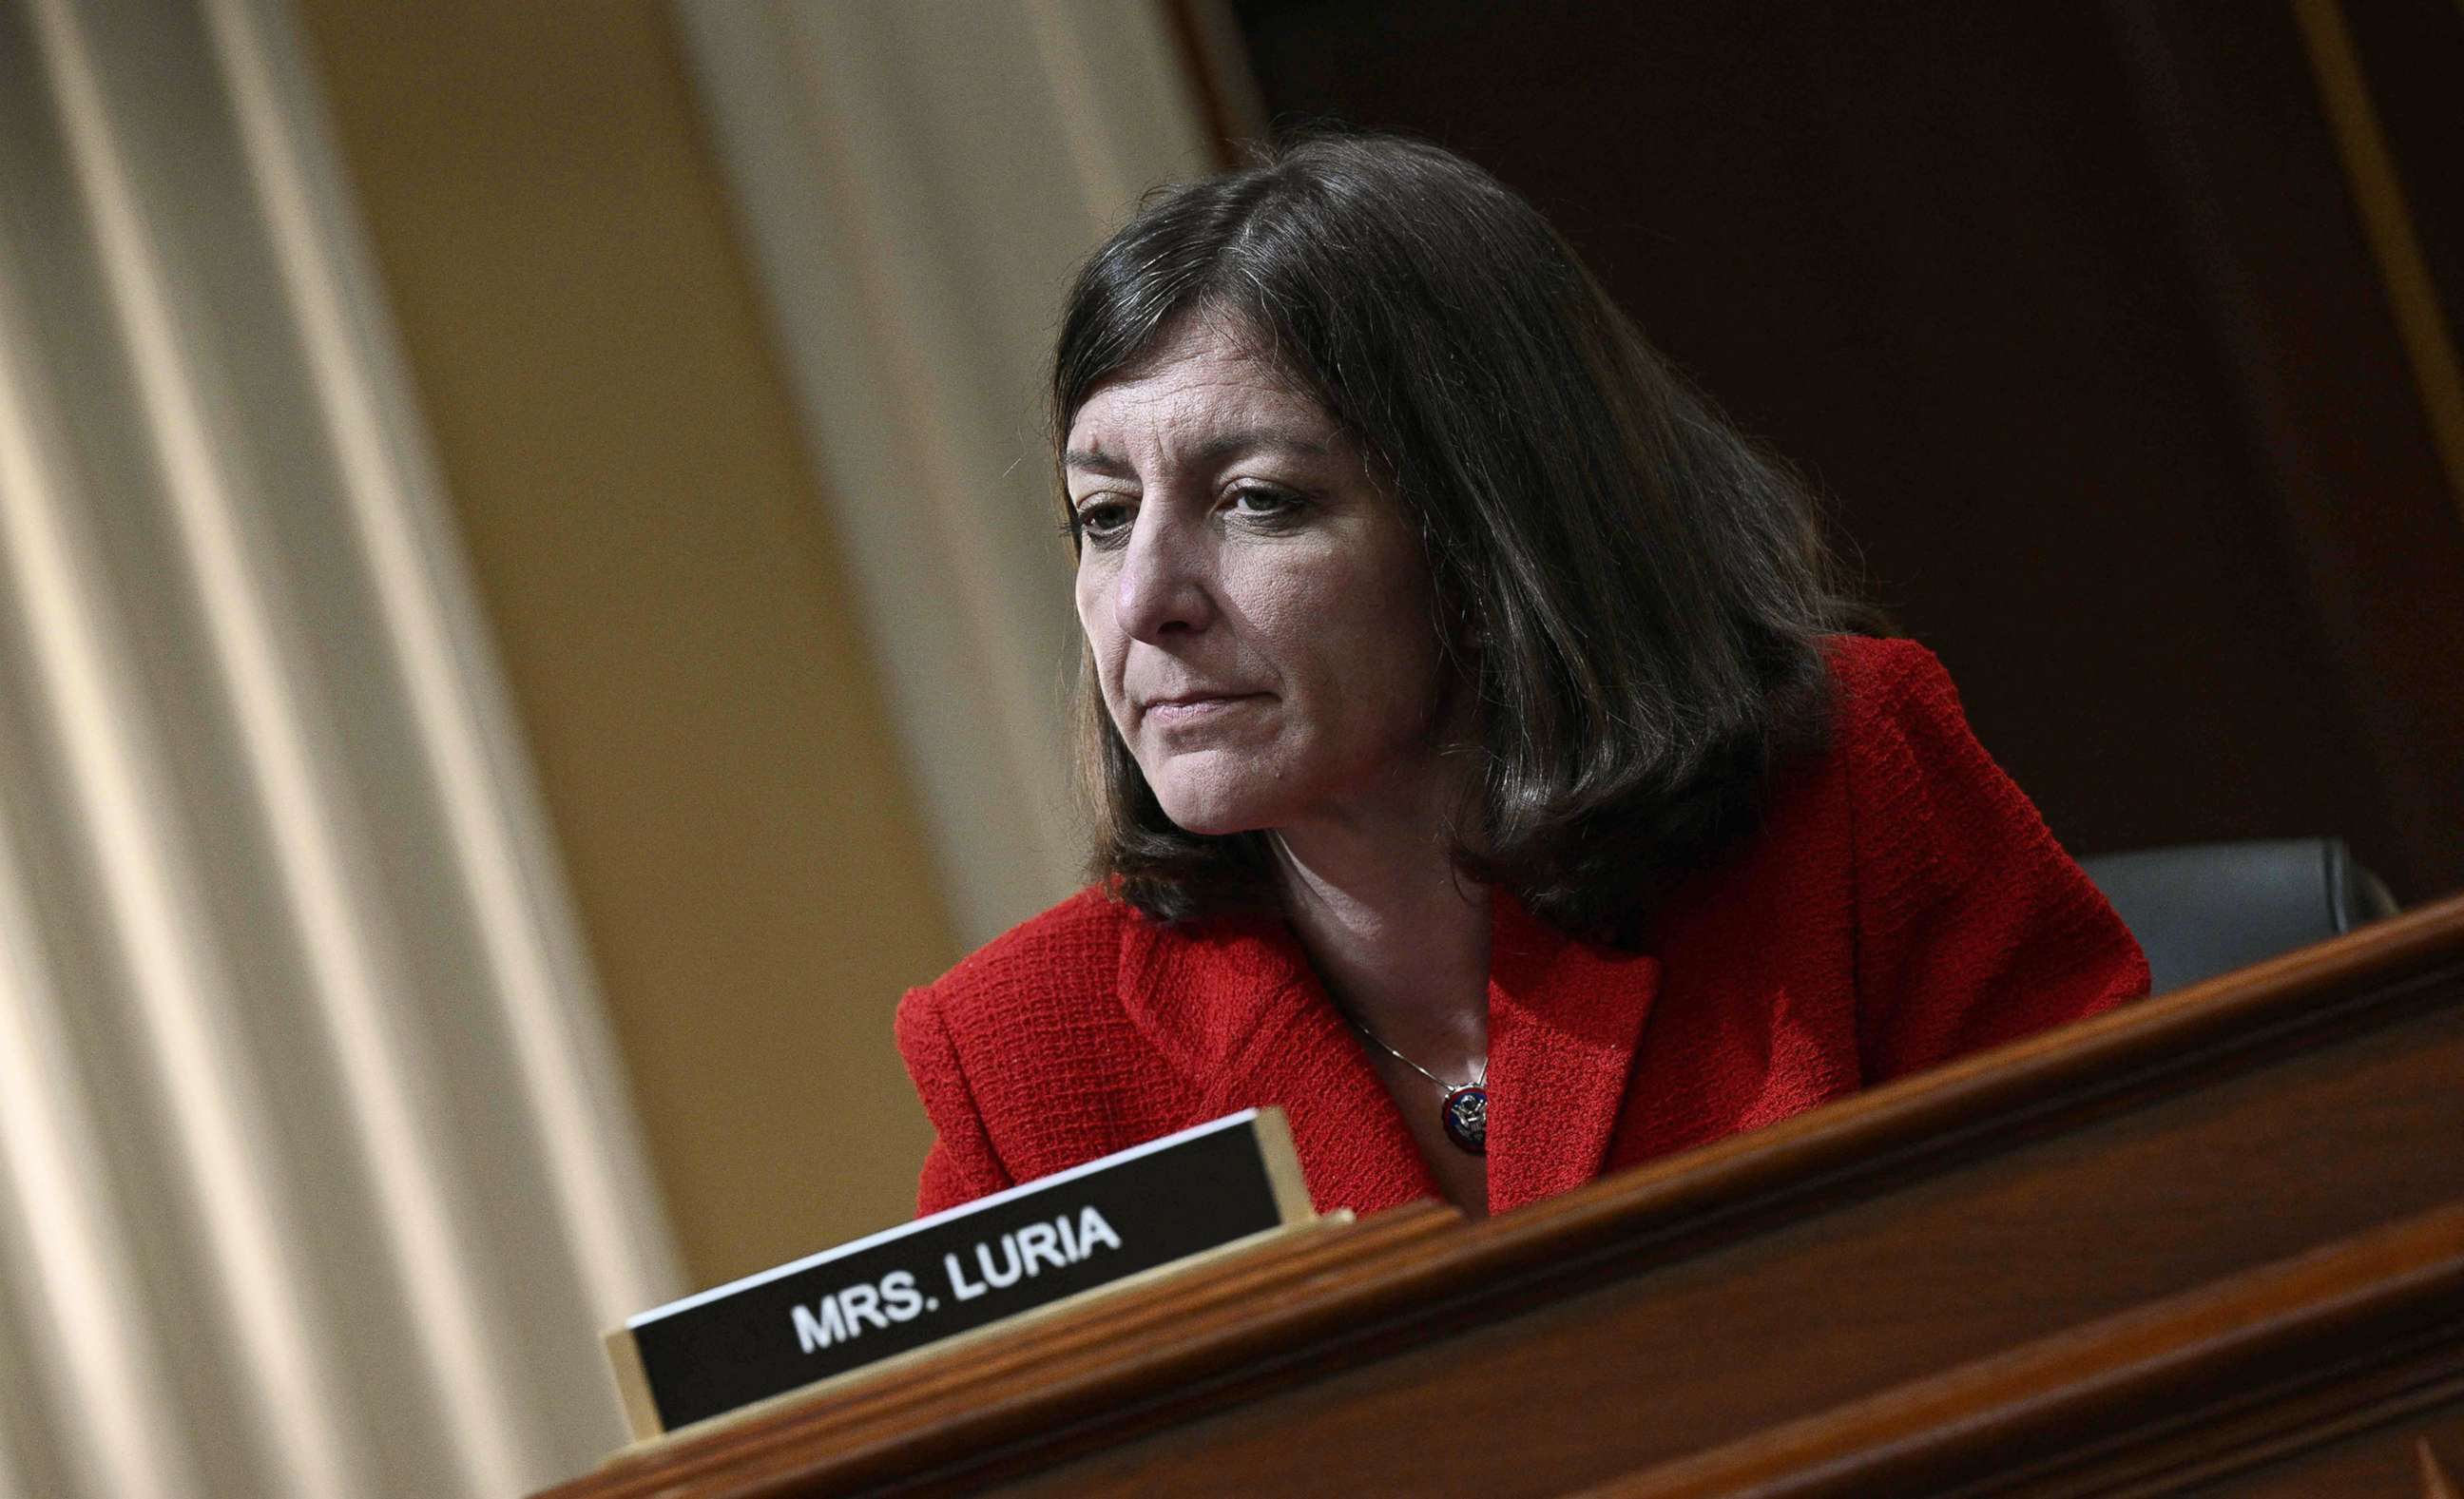 PHOTO: Rep. Elaine Luria listens during a House Select Committee hearing in Washington, D.C., June 9, 2022.